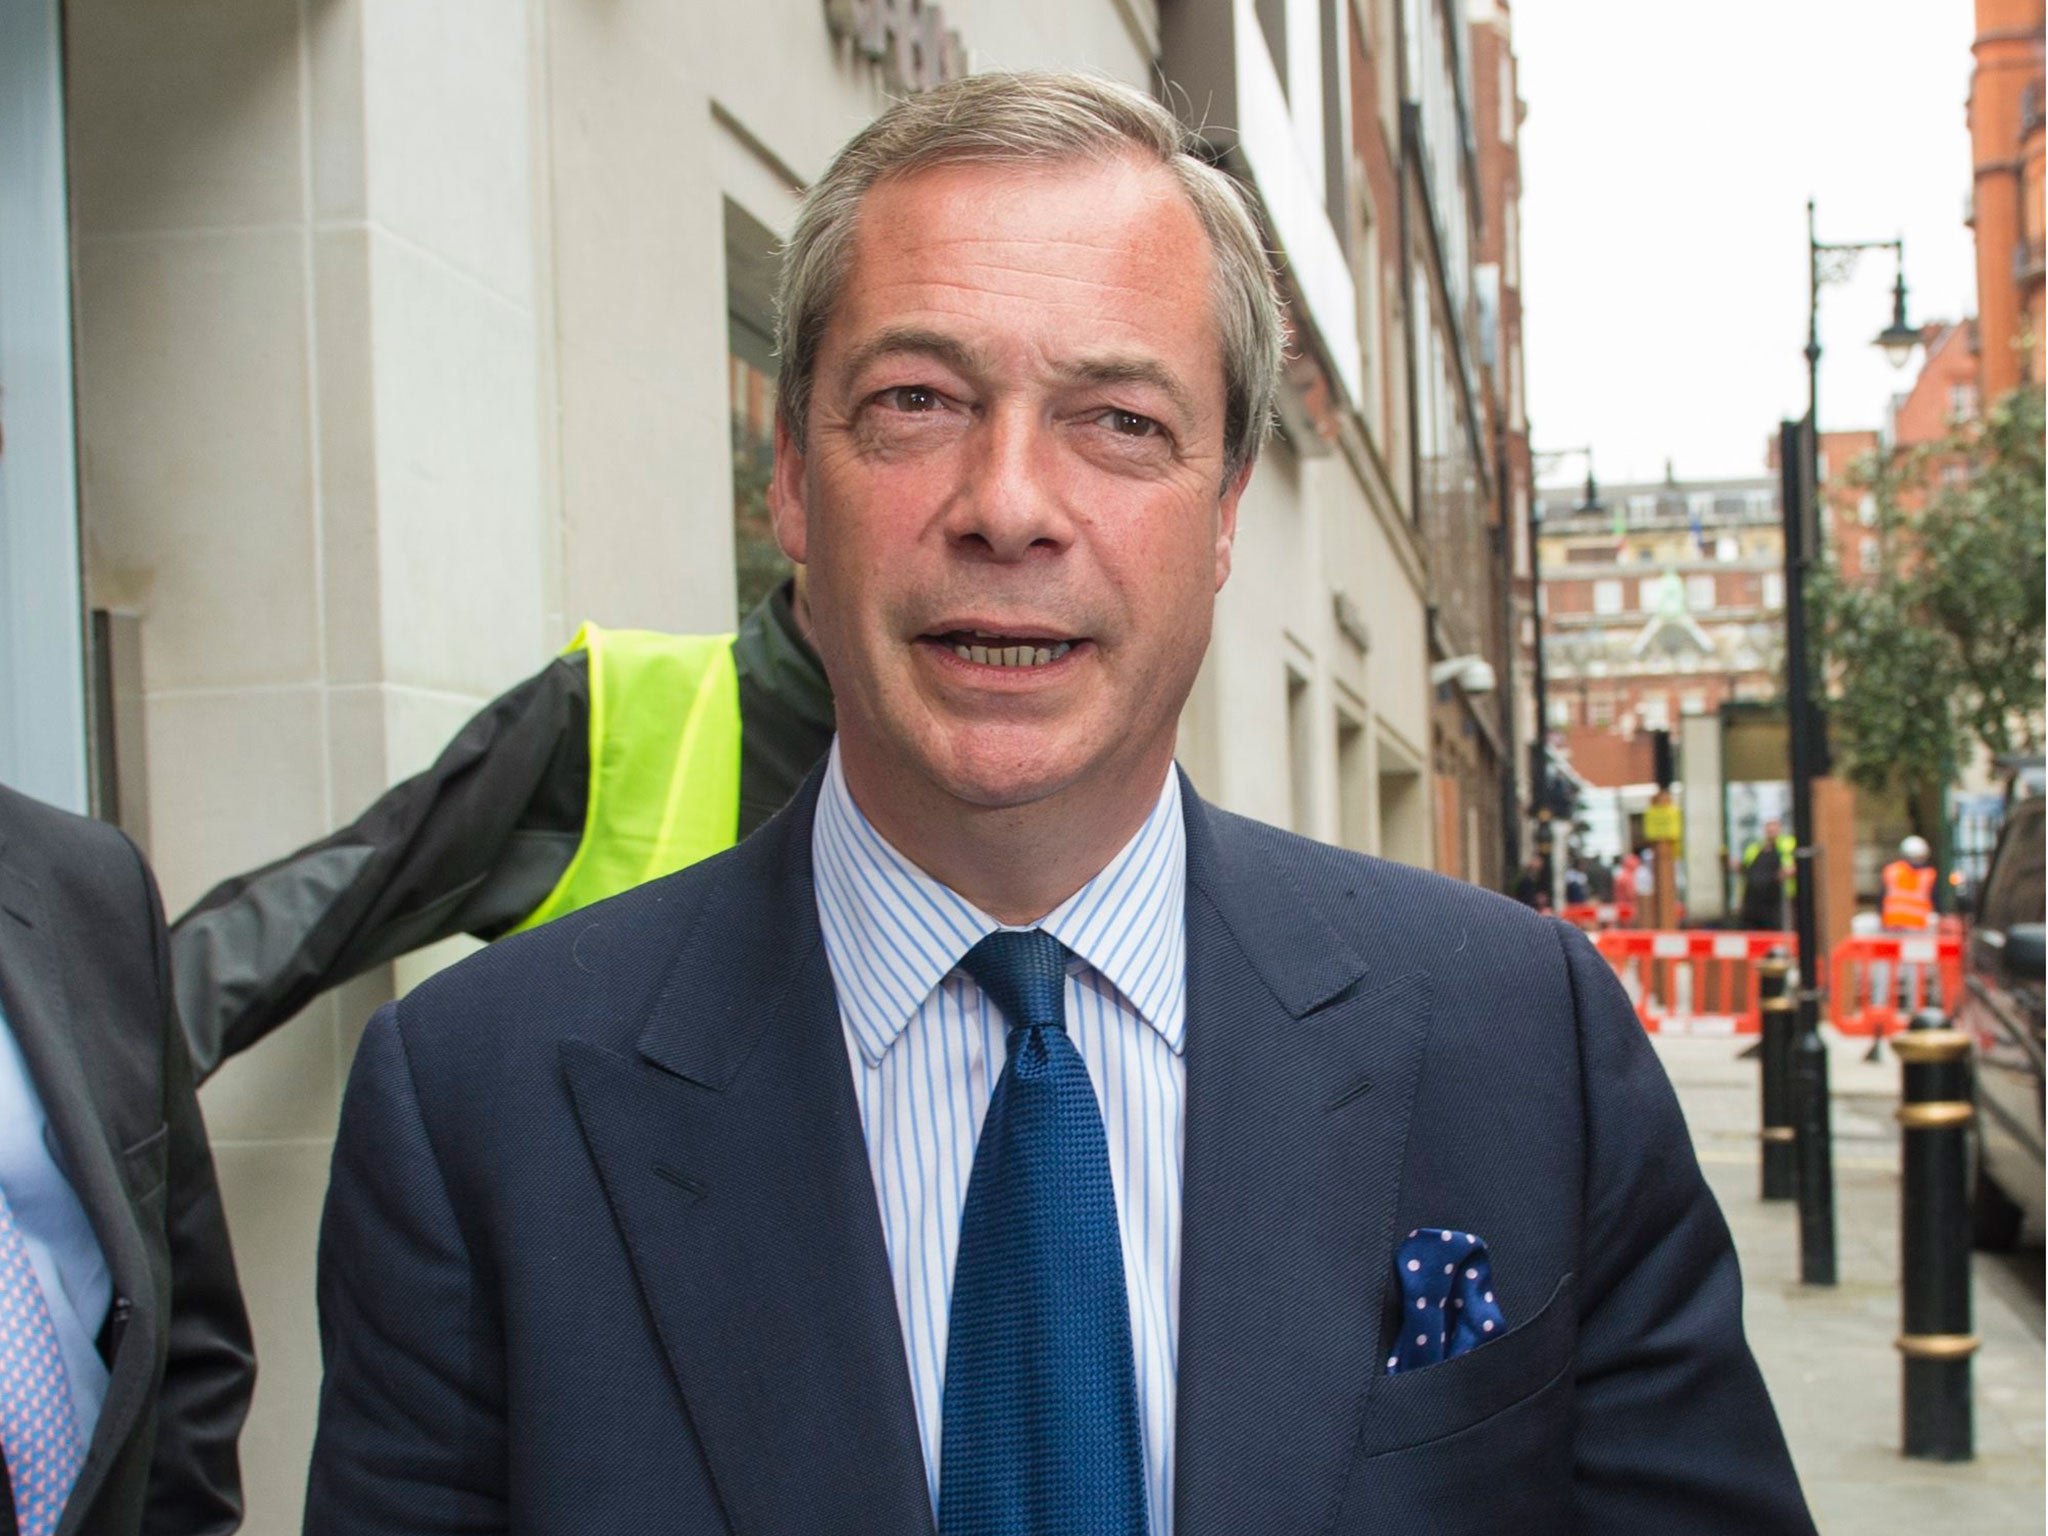 Nigel Farage has spoken about UKIP being banned from Pride in London Parade